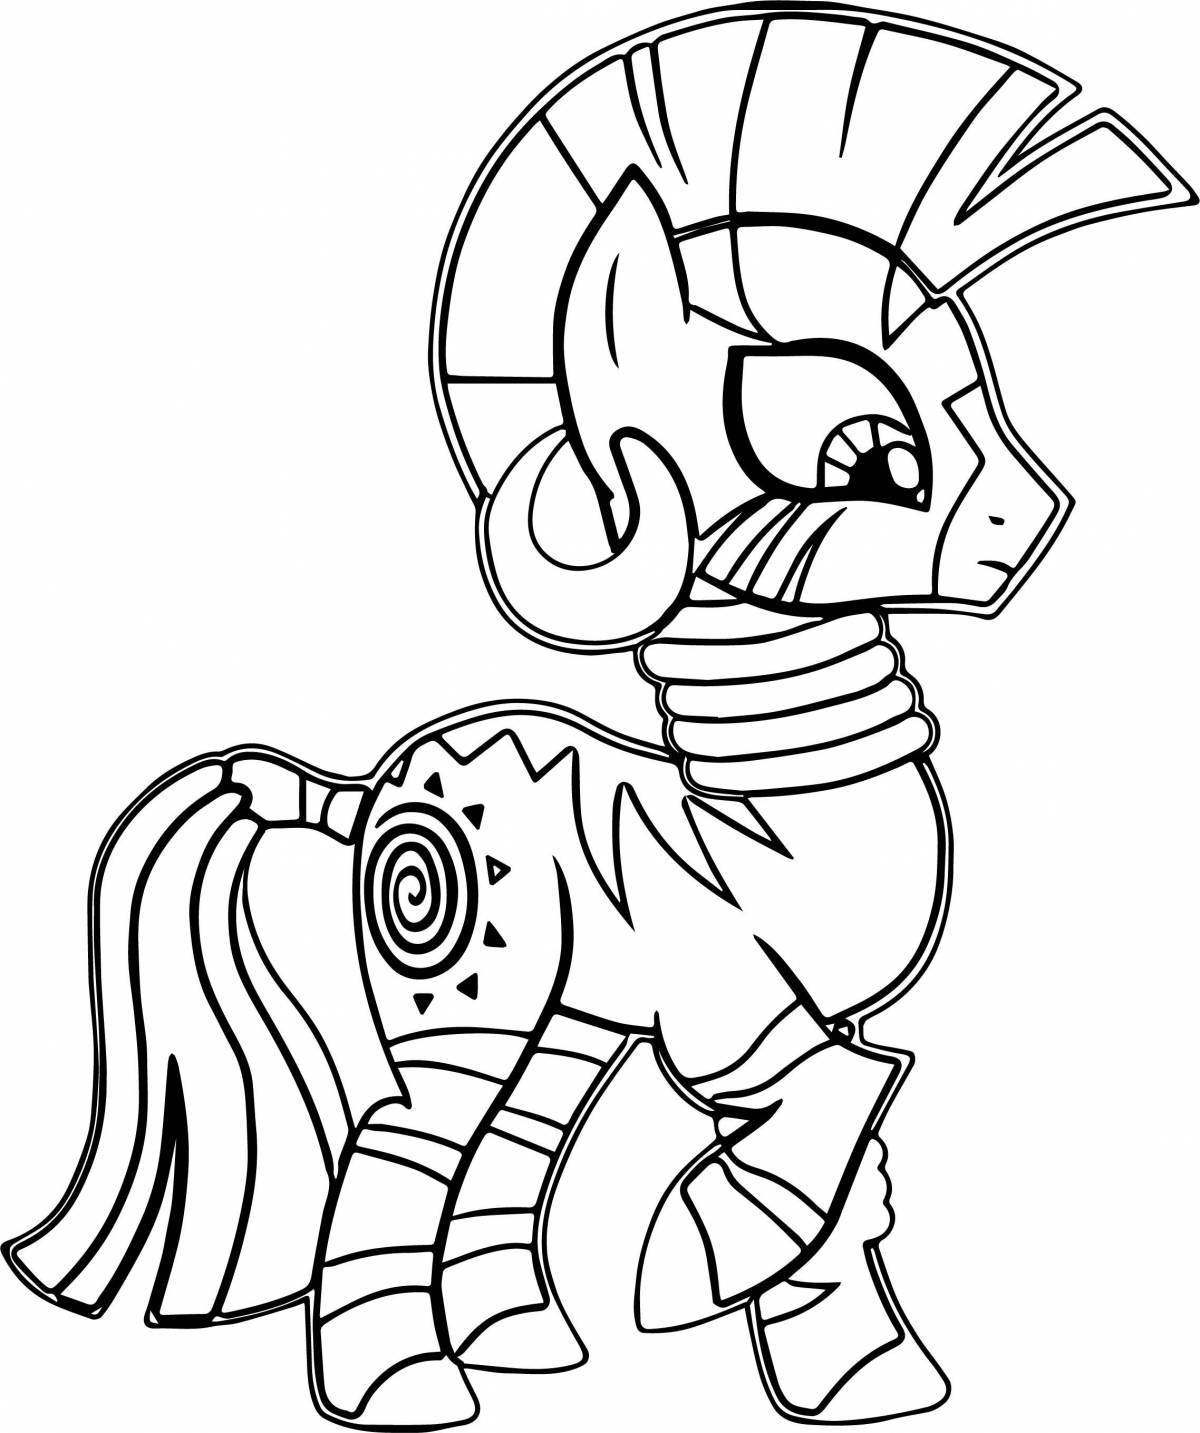 Coloring page gorgeous storm pony